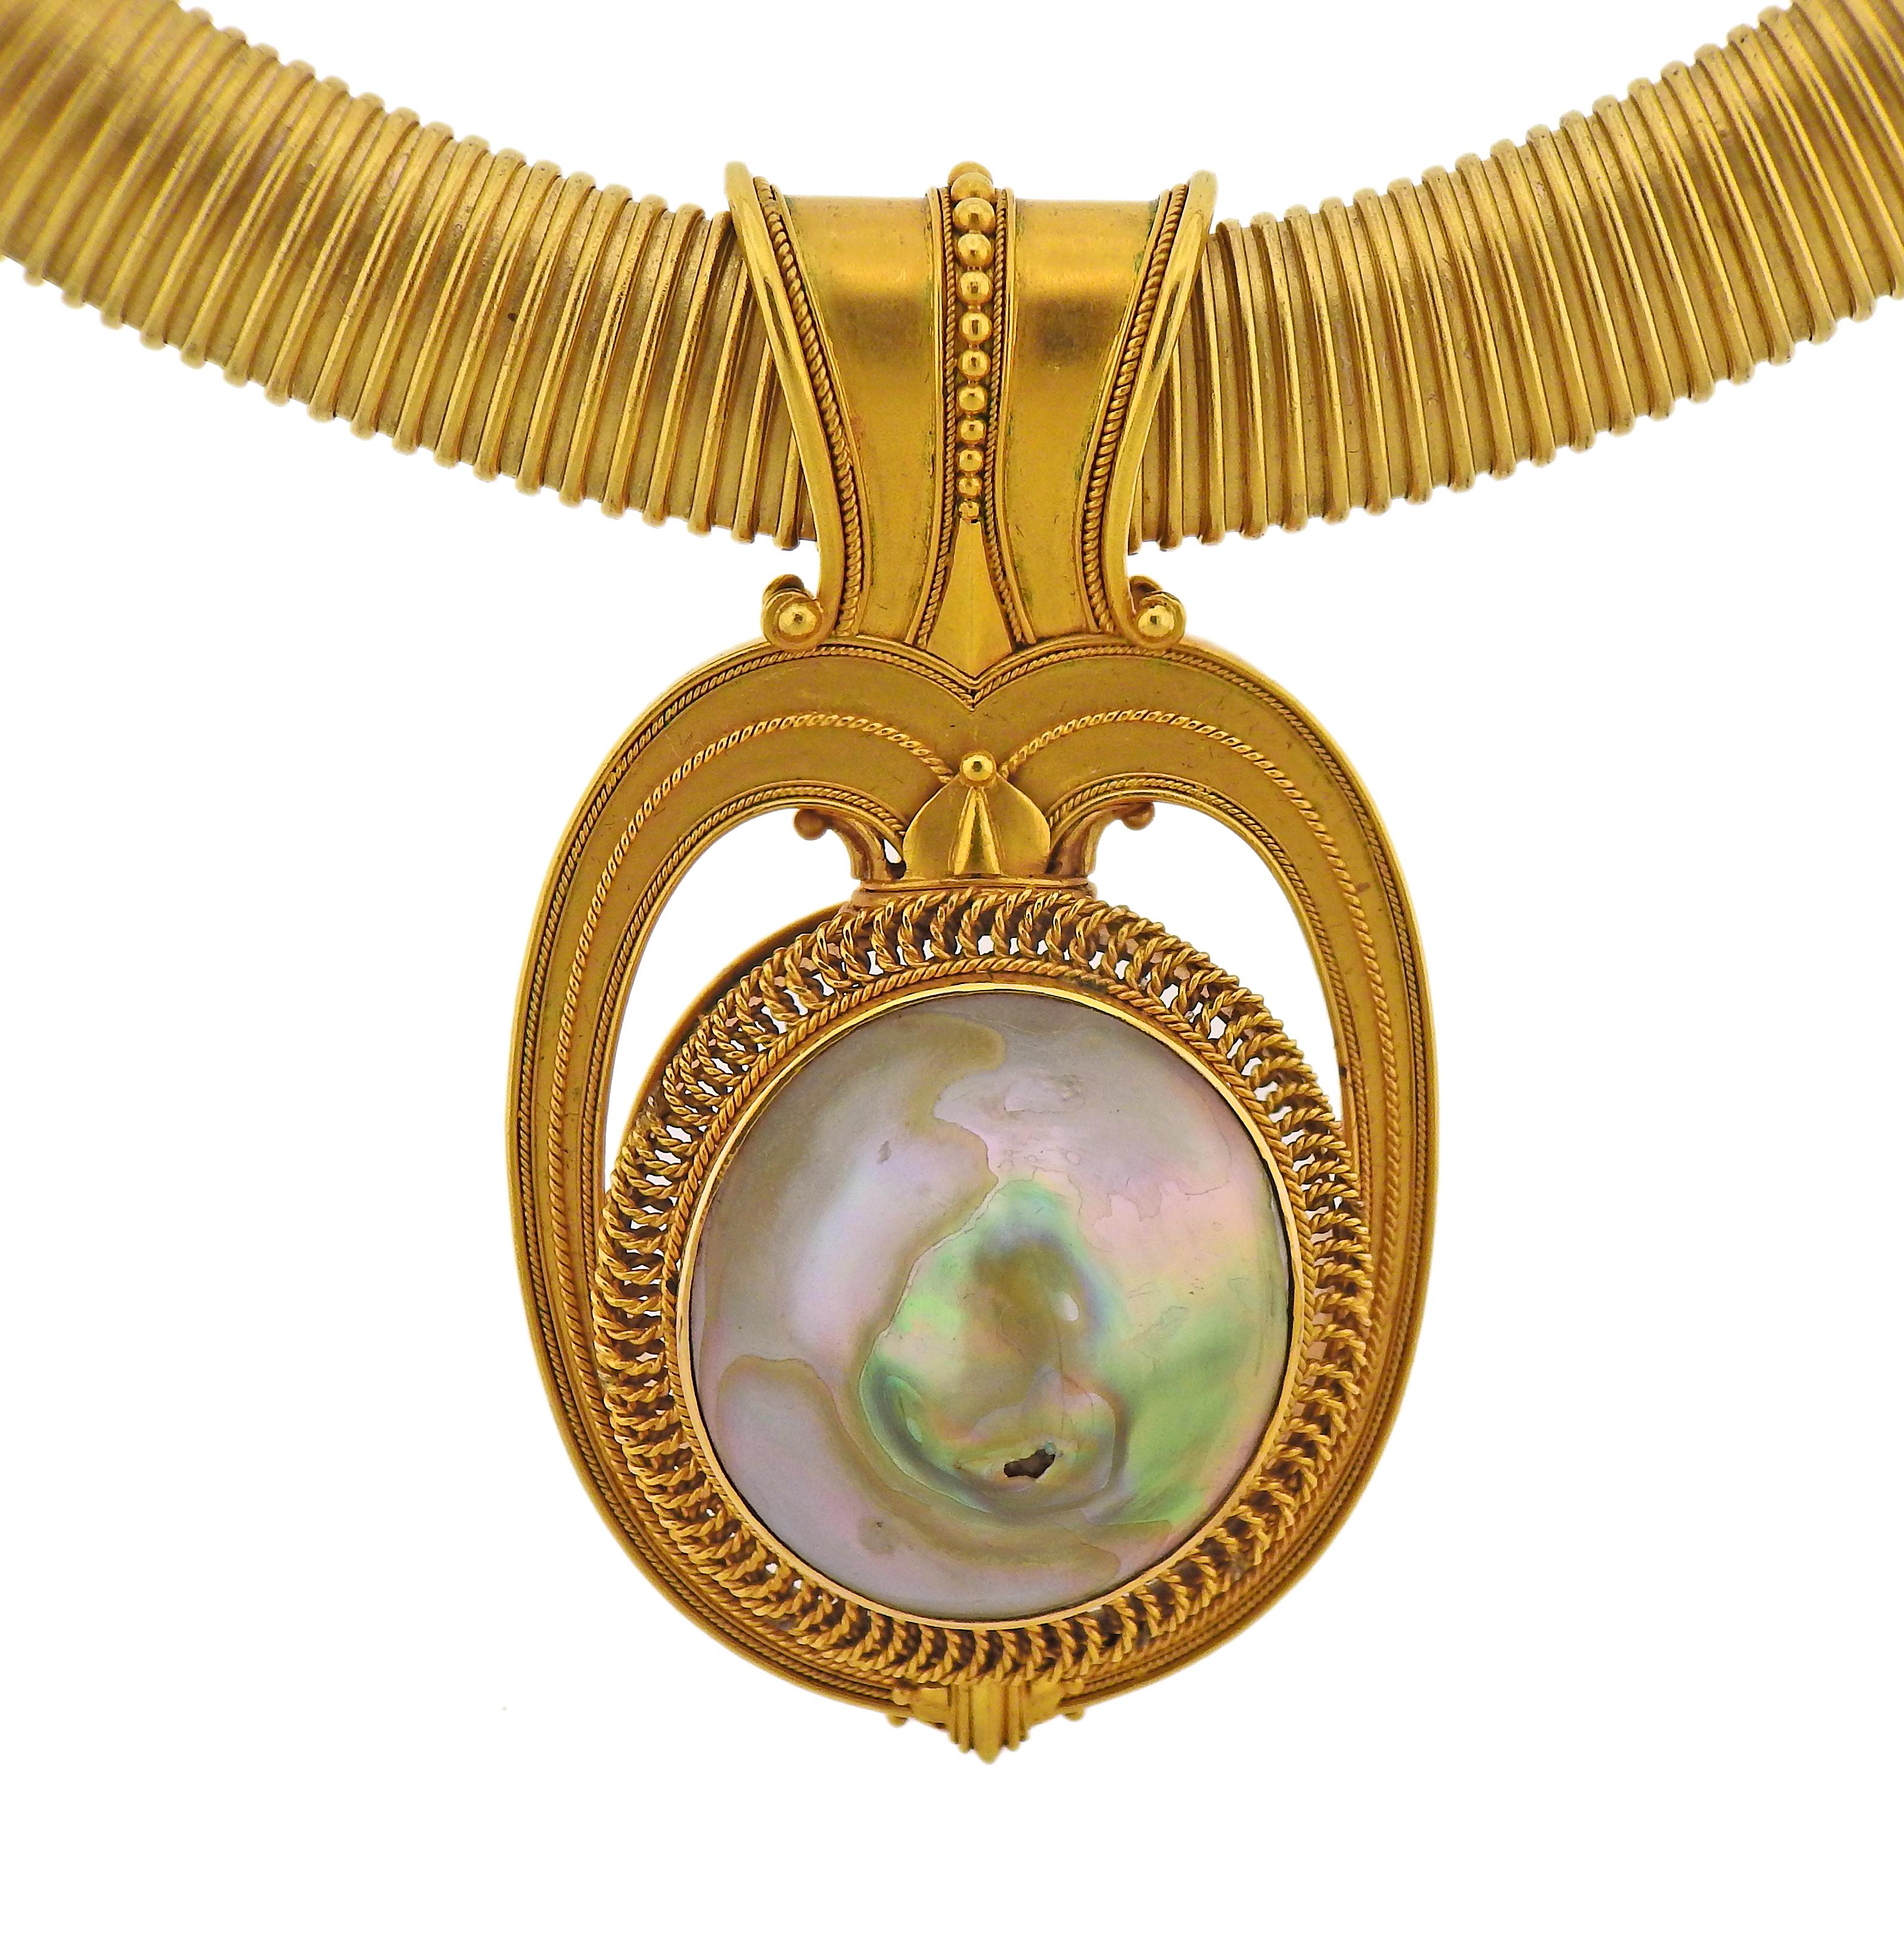 Antique Victorian English 15k gold necklace with large pendant, set with blister pearl (pearl is damaged). Necklace is 17.75